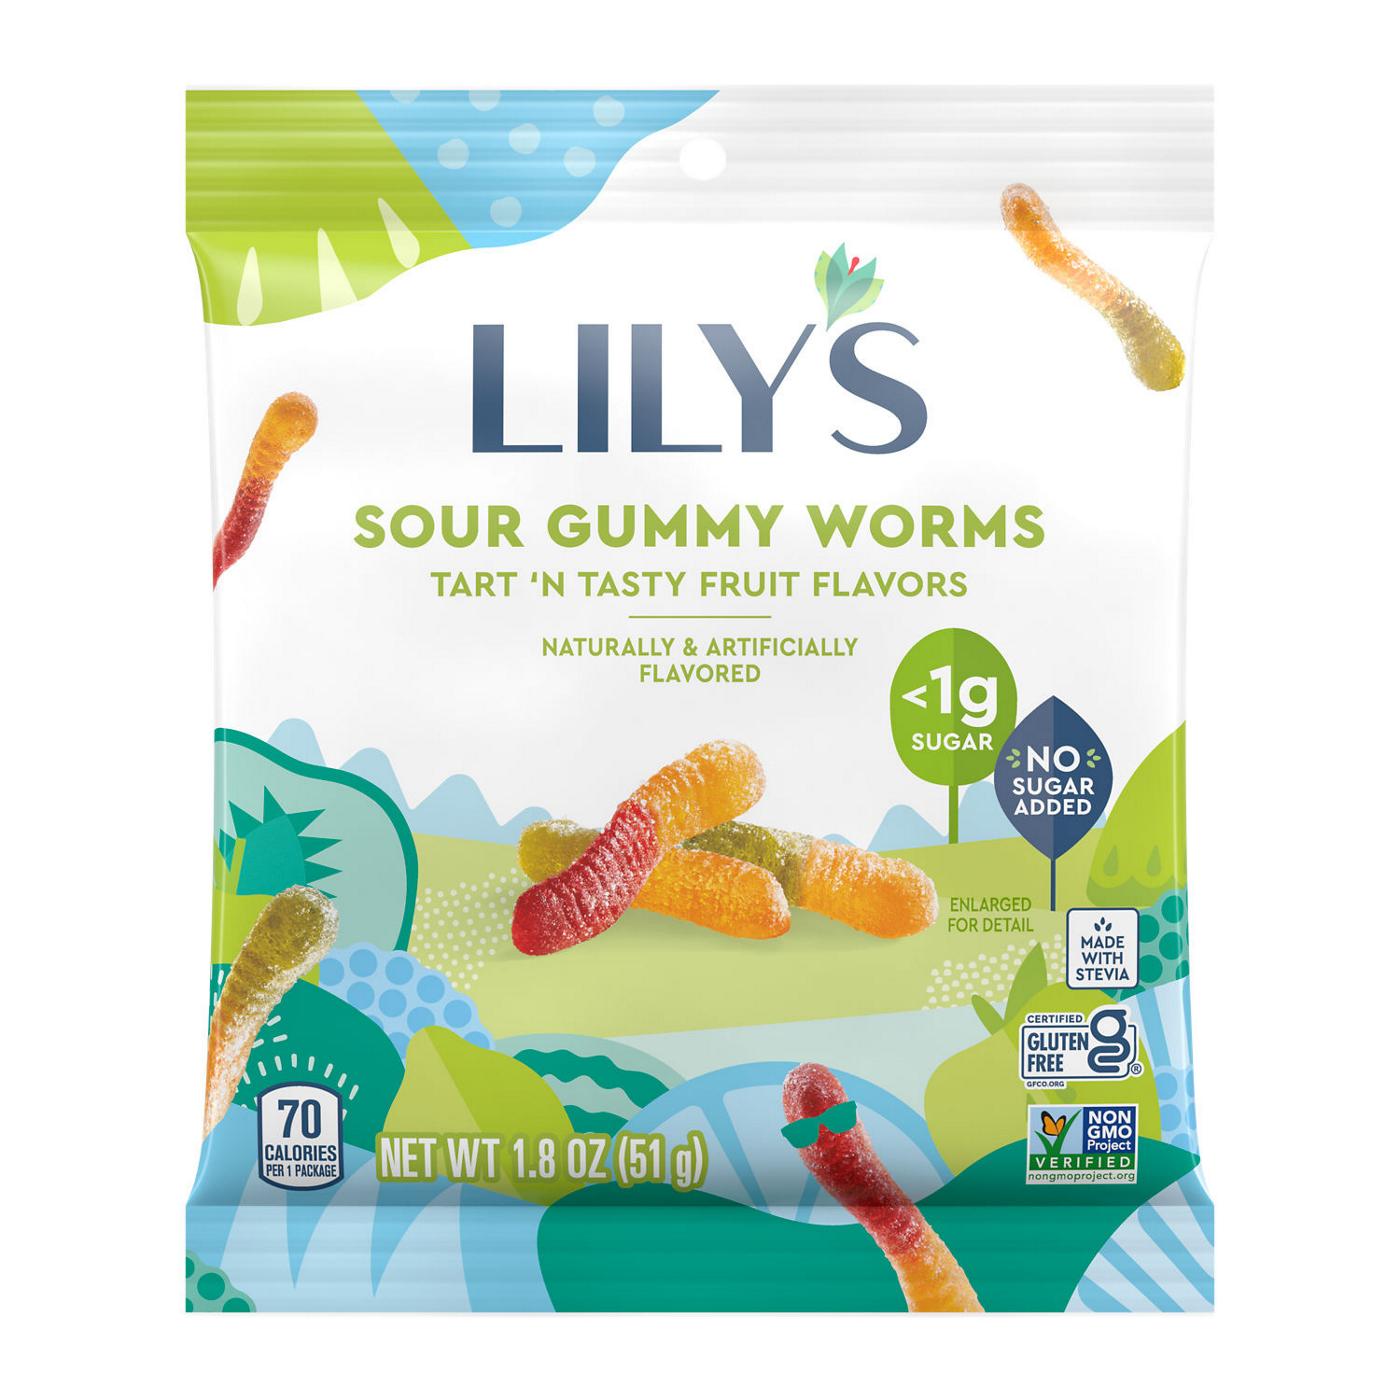 Lily's Tart 'n Tasty Fruit Sour Gummy Worms; image 1 of 5